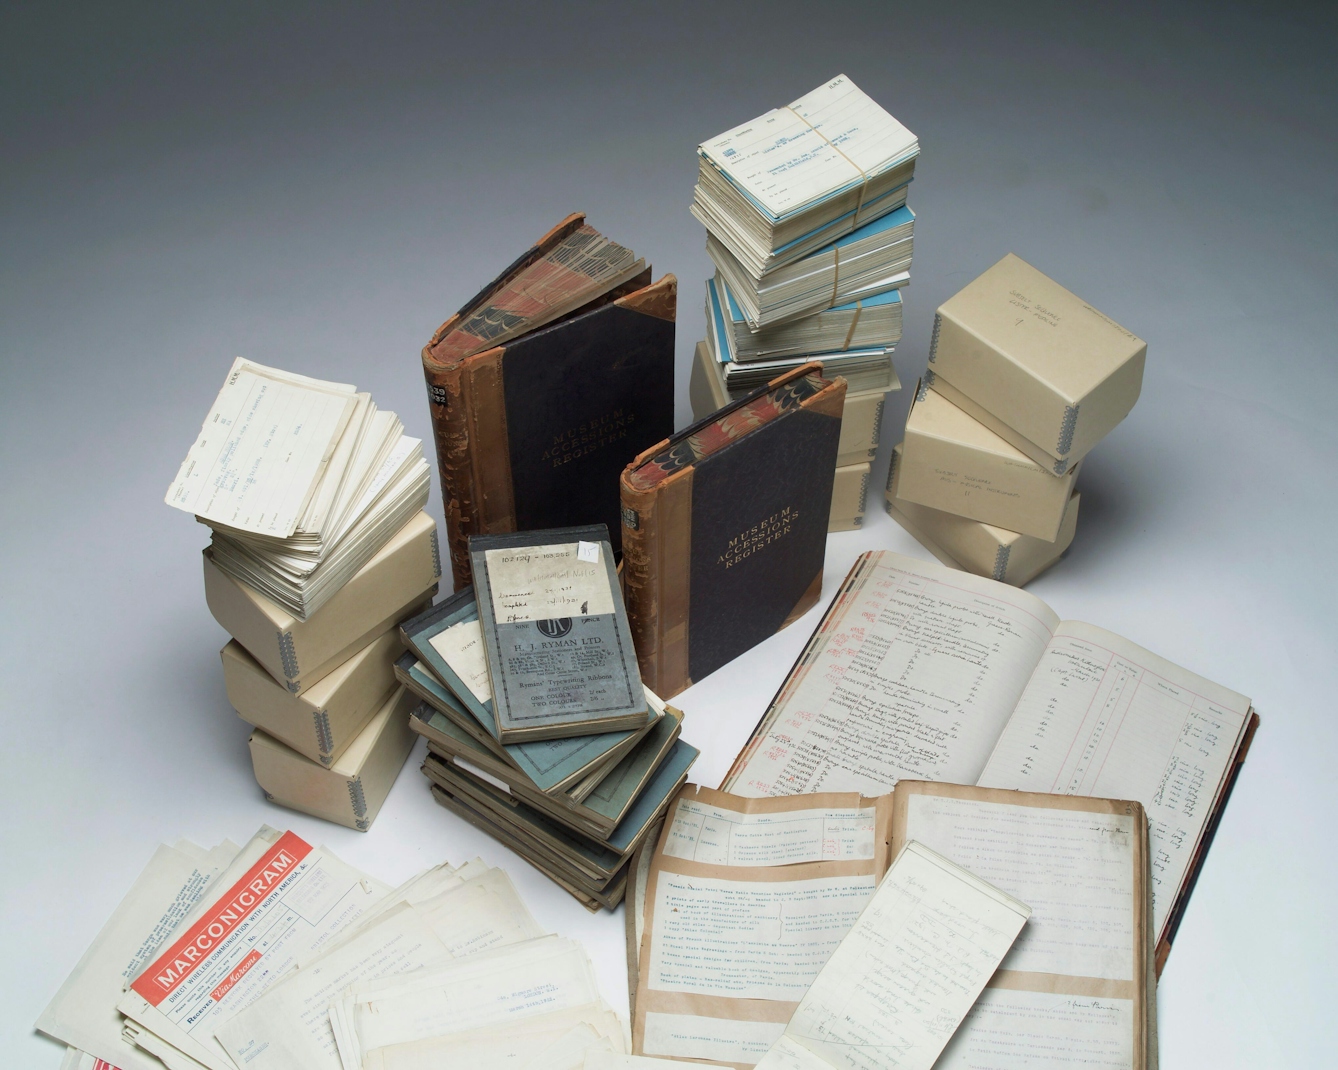 A selection of bound ledgers, registers, notebooks,  cataloguing cards and correspondence containing historical records of the acquisition of items for the Wellcome Medical Museum and Library